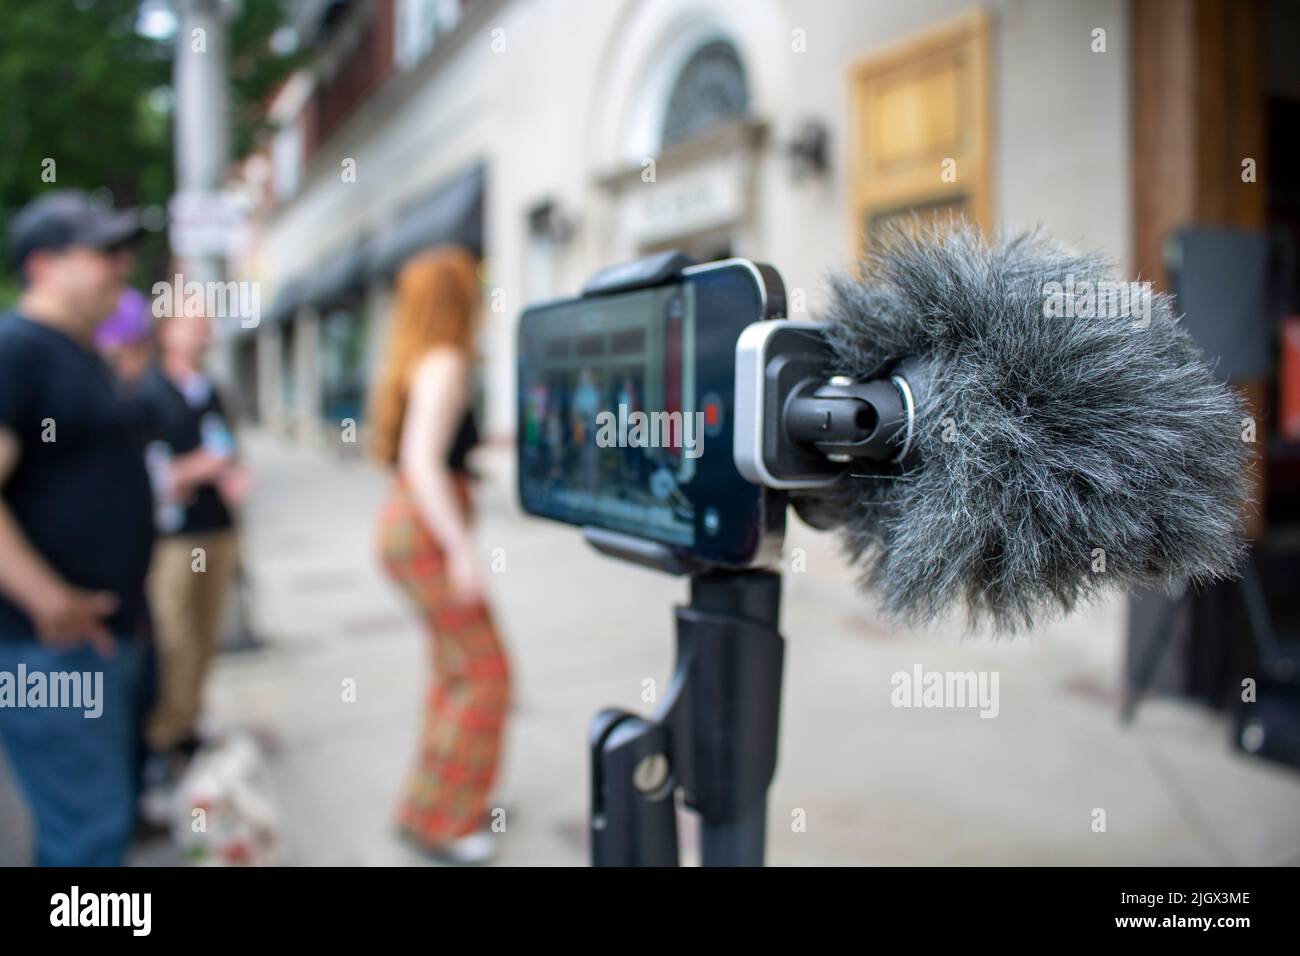 Digital Cardioid Microphone on smartphone recording band with a typhoid while groupies dance Stock Photo